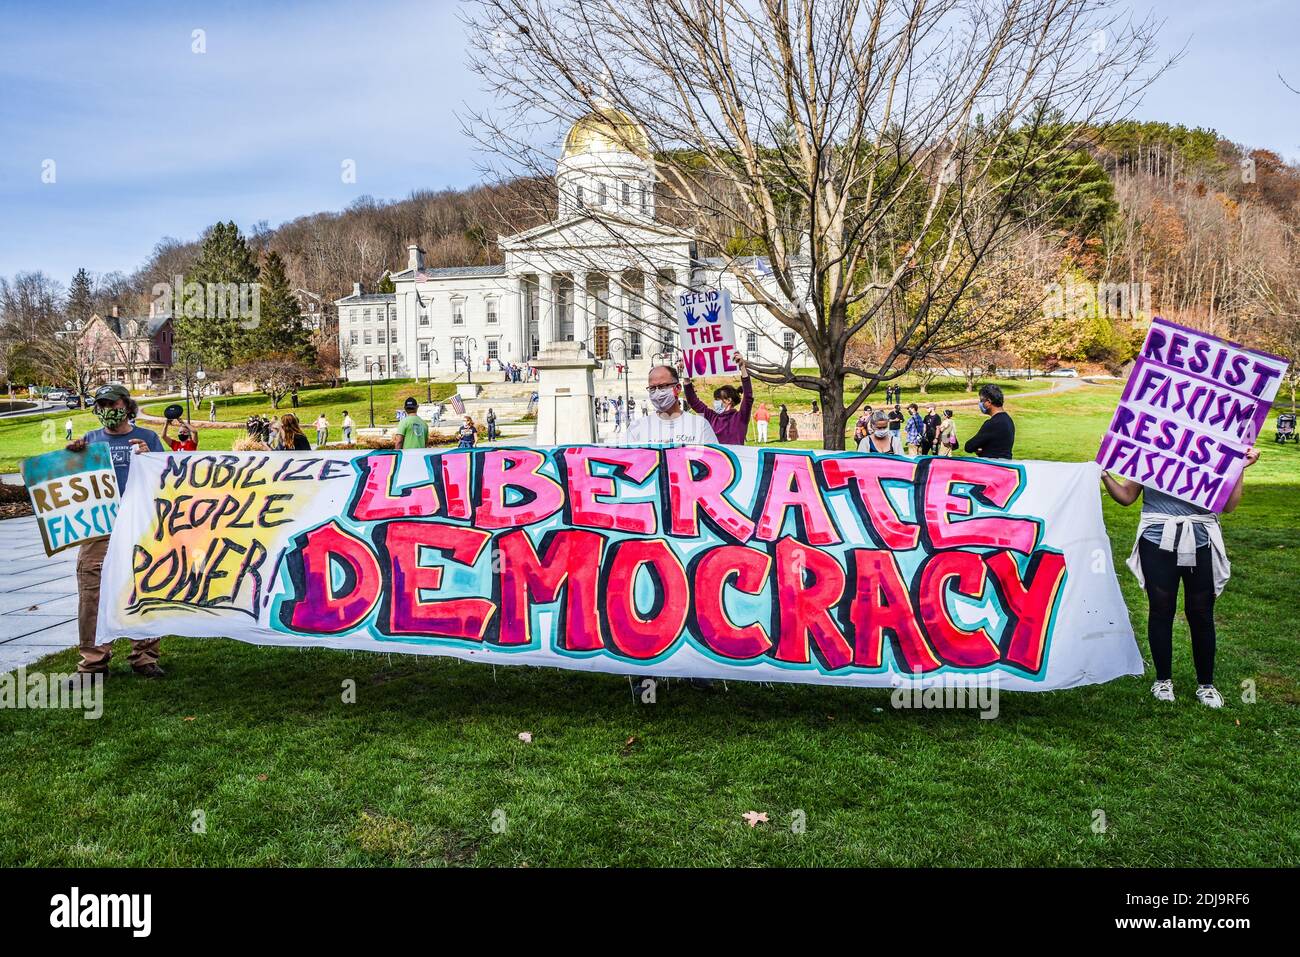 Pro-Democracy demonstrators AFTER THE US 2020 PRESIDENTIAL ELECTION in front of the Vermont State House, Montpelier, VT, USA. Stock Photo